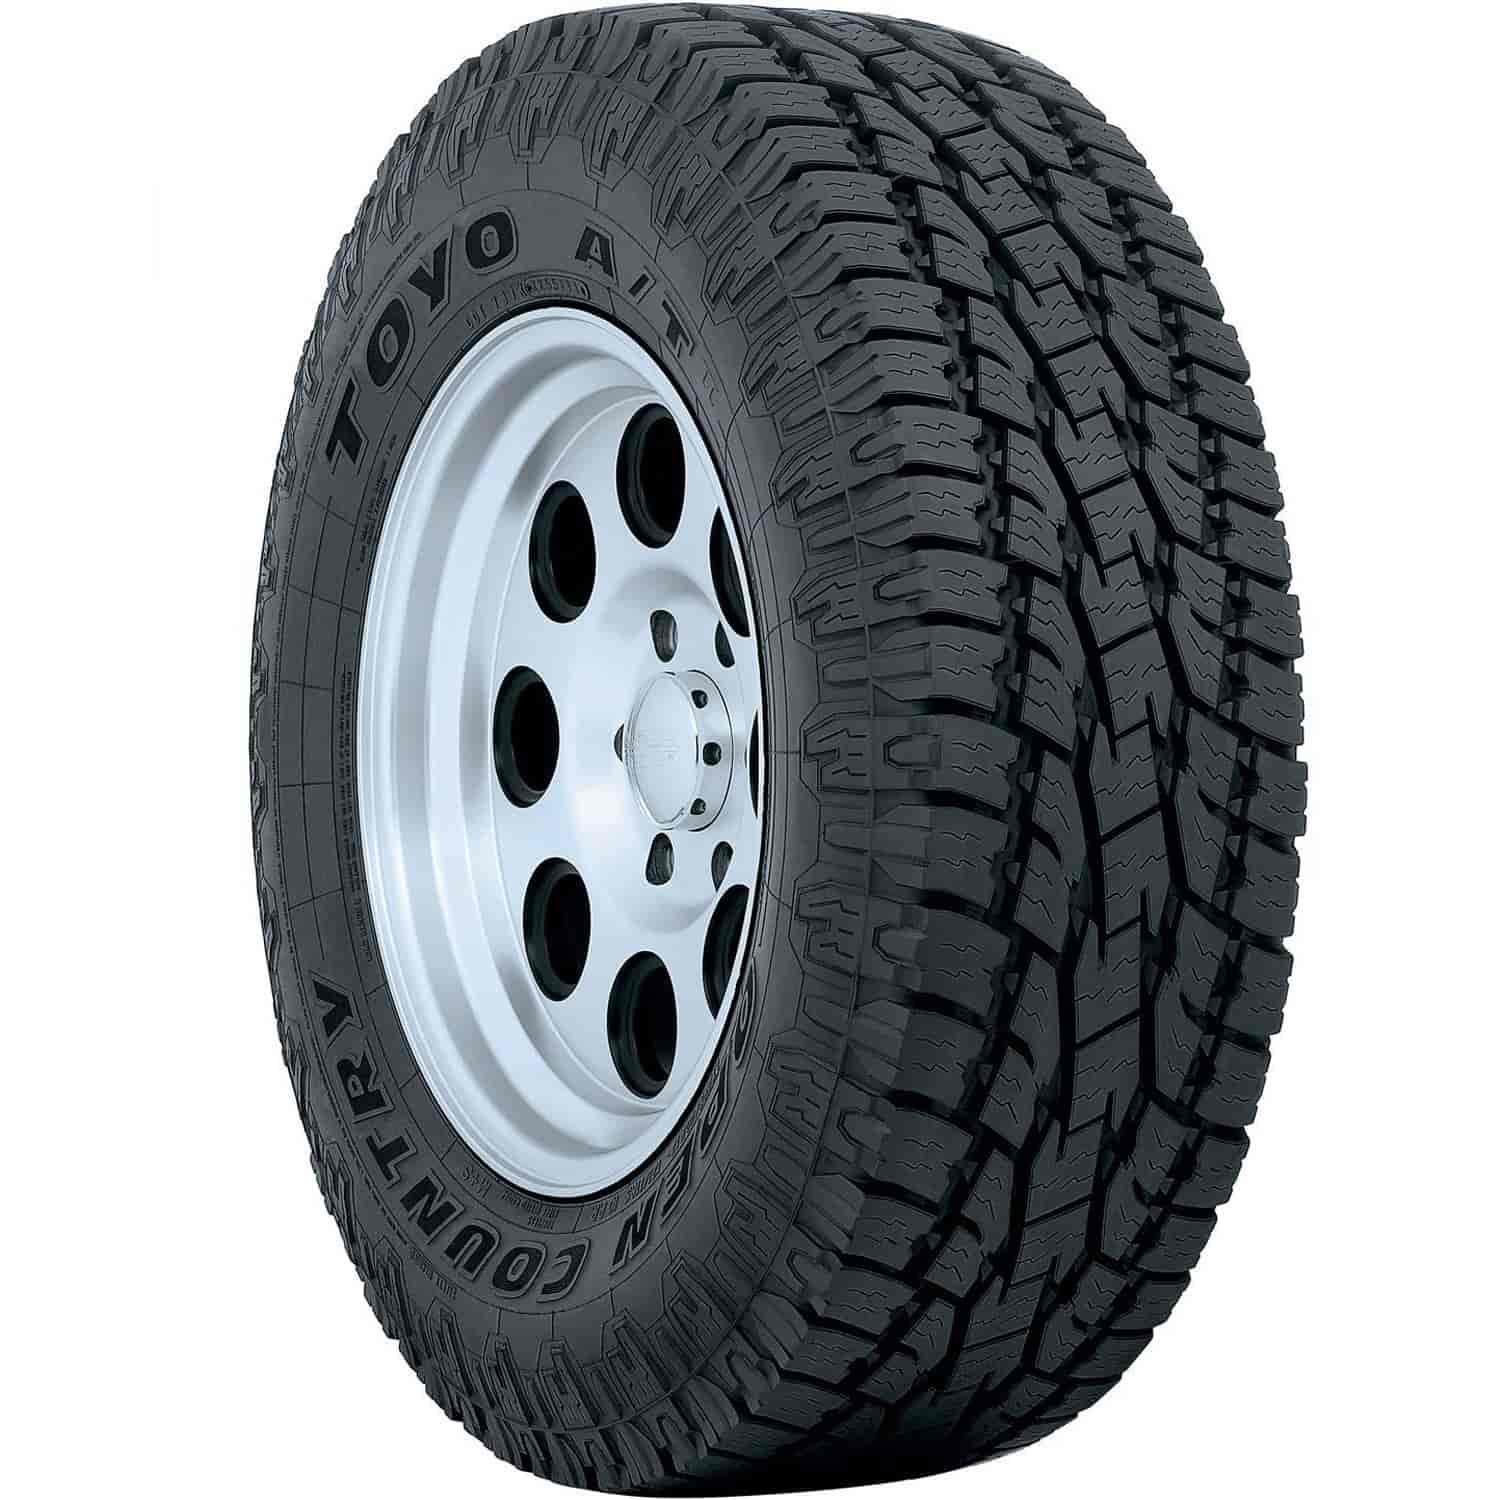 OPEN COUNTRY A/T II LT305/55R20 125/122Q